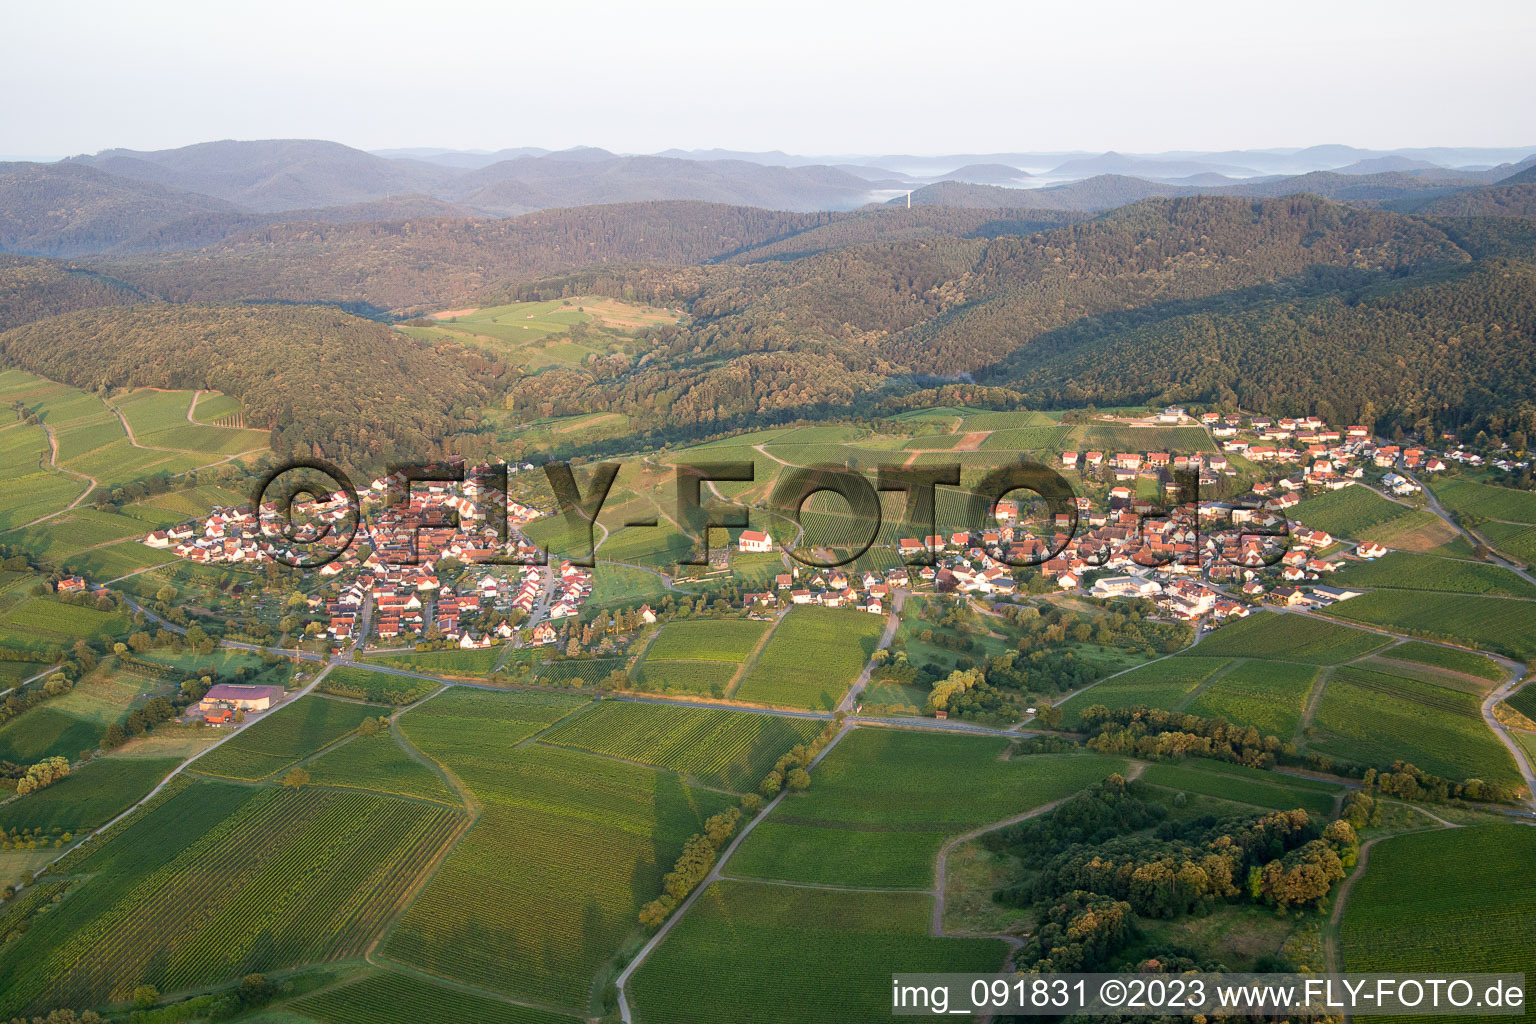 District Gleishorbach in Gleiszellen-Gleishorbach in the state Rhineland-Palatinate, Germany from the plane